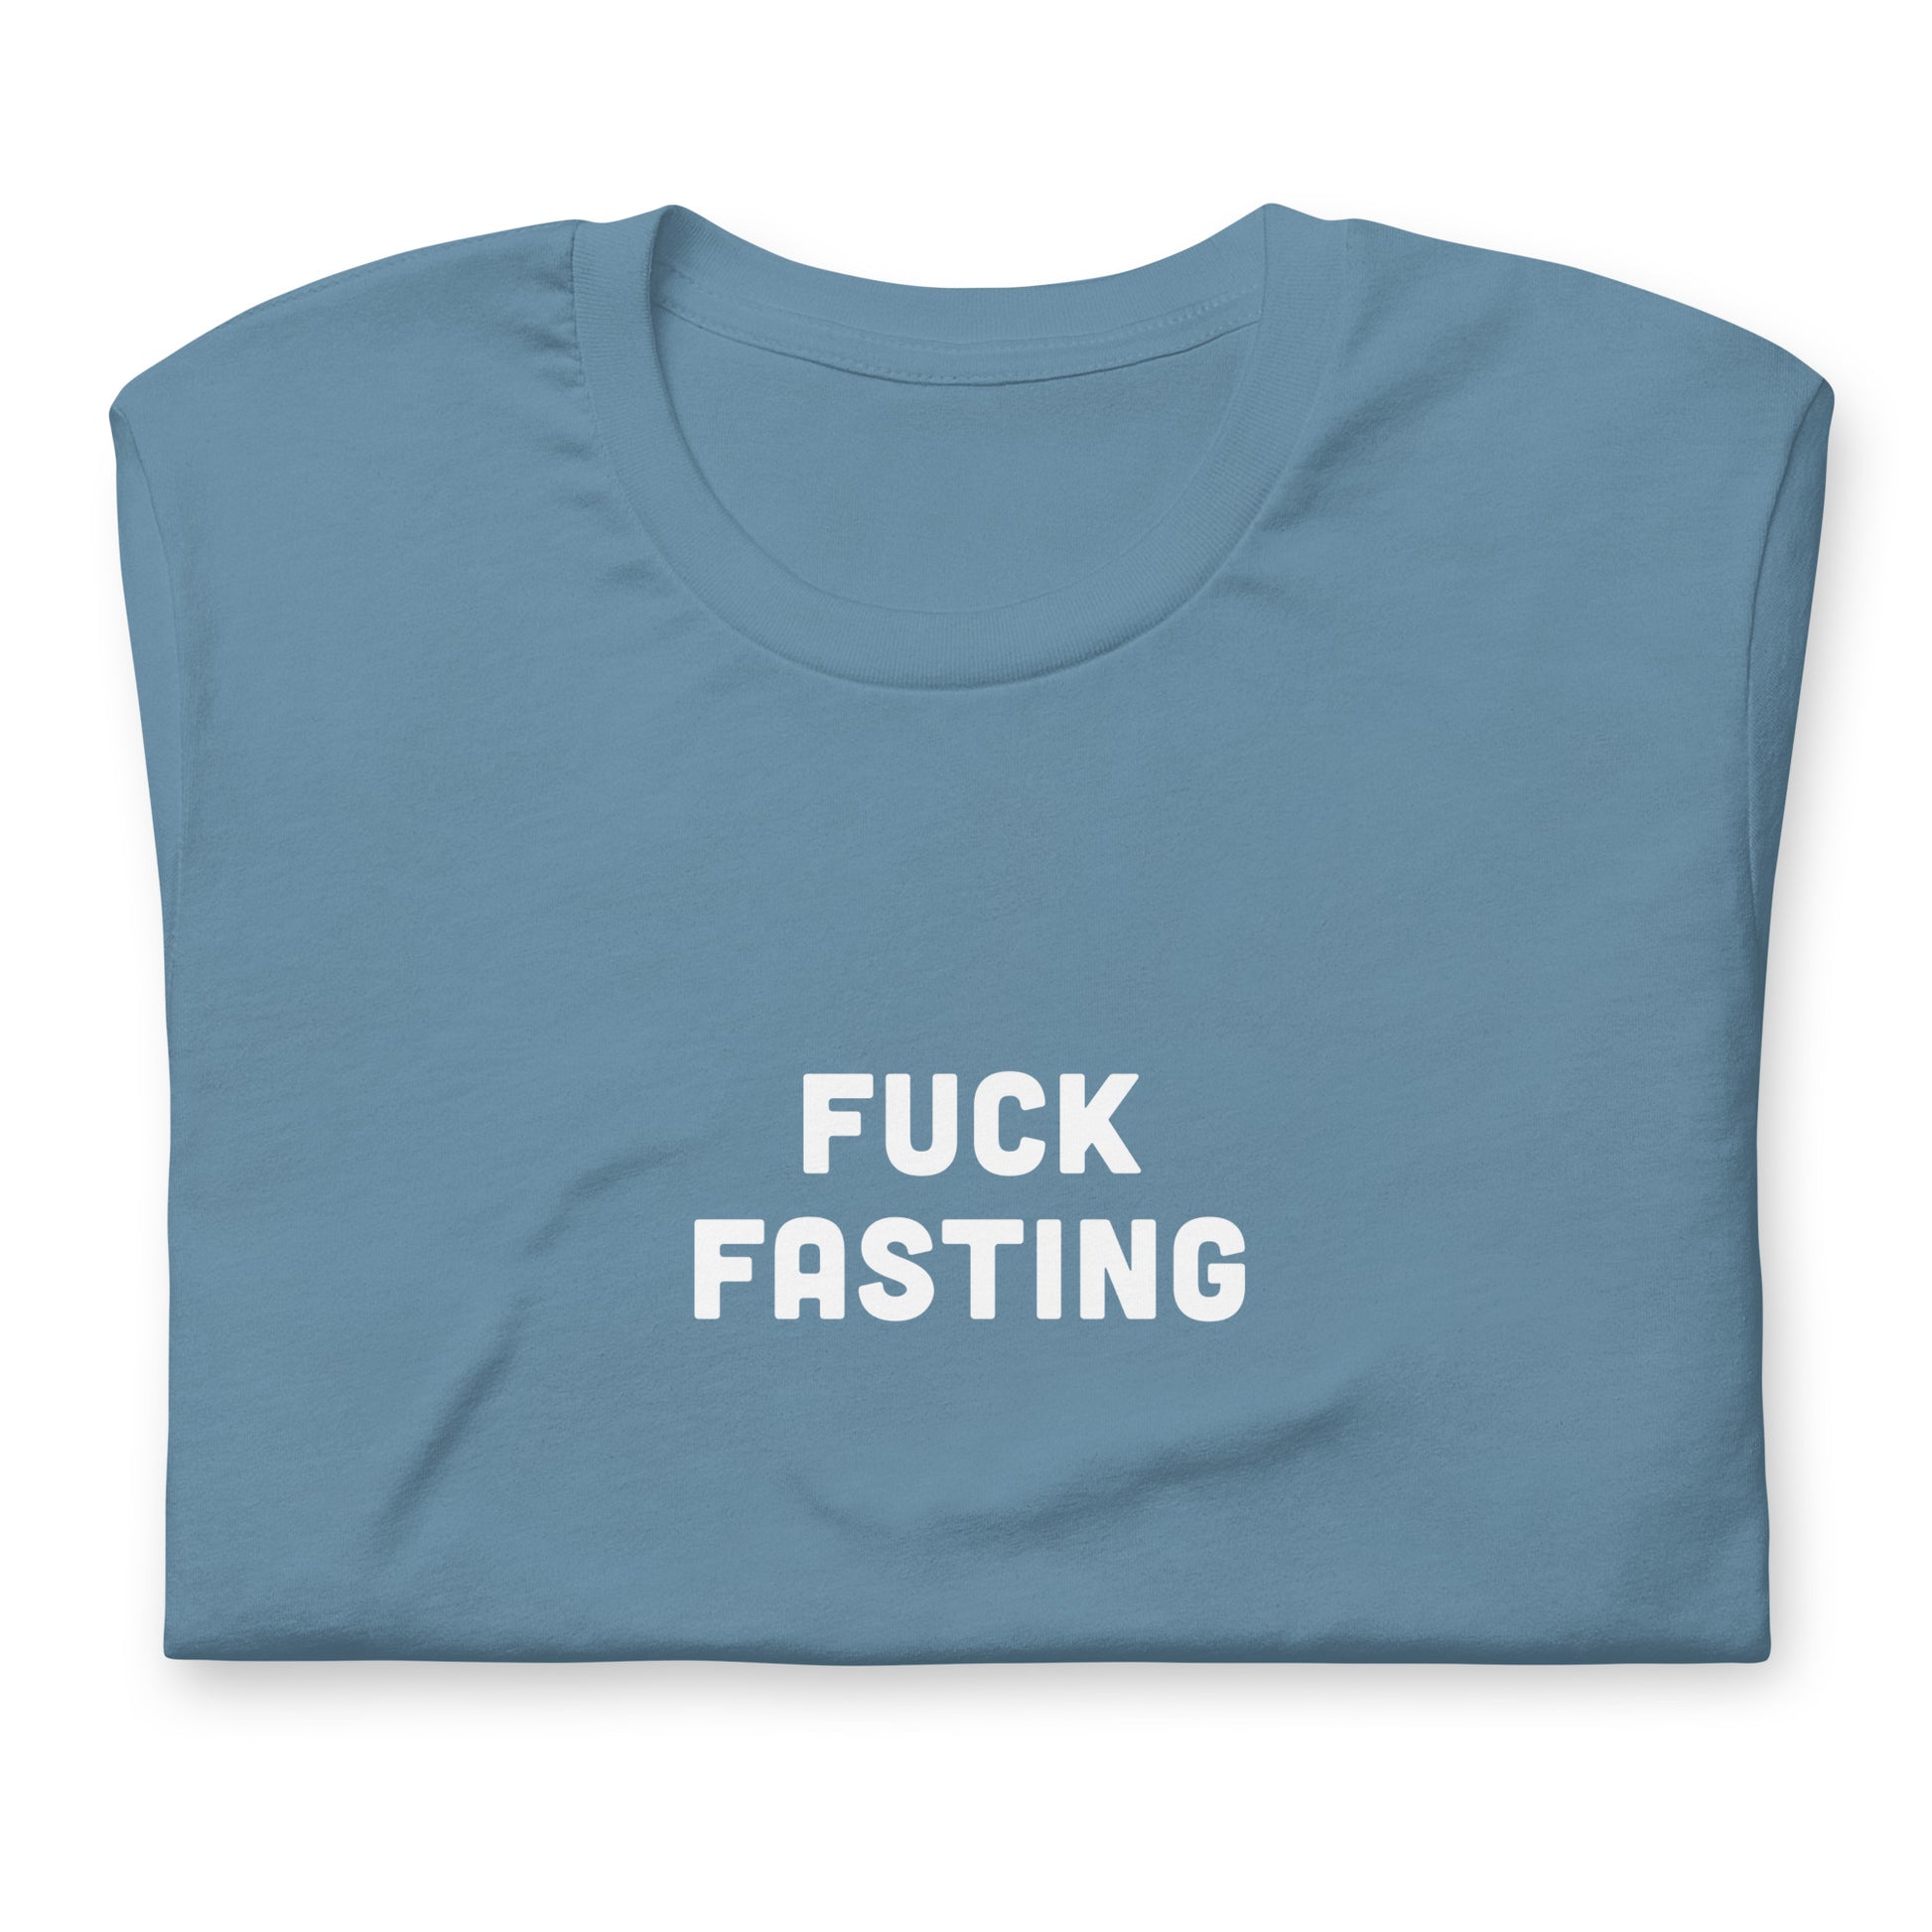 Fuck Fasting T-Shirt Size S Color Black